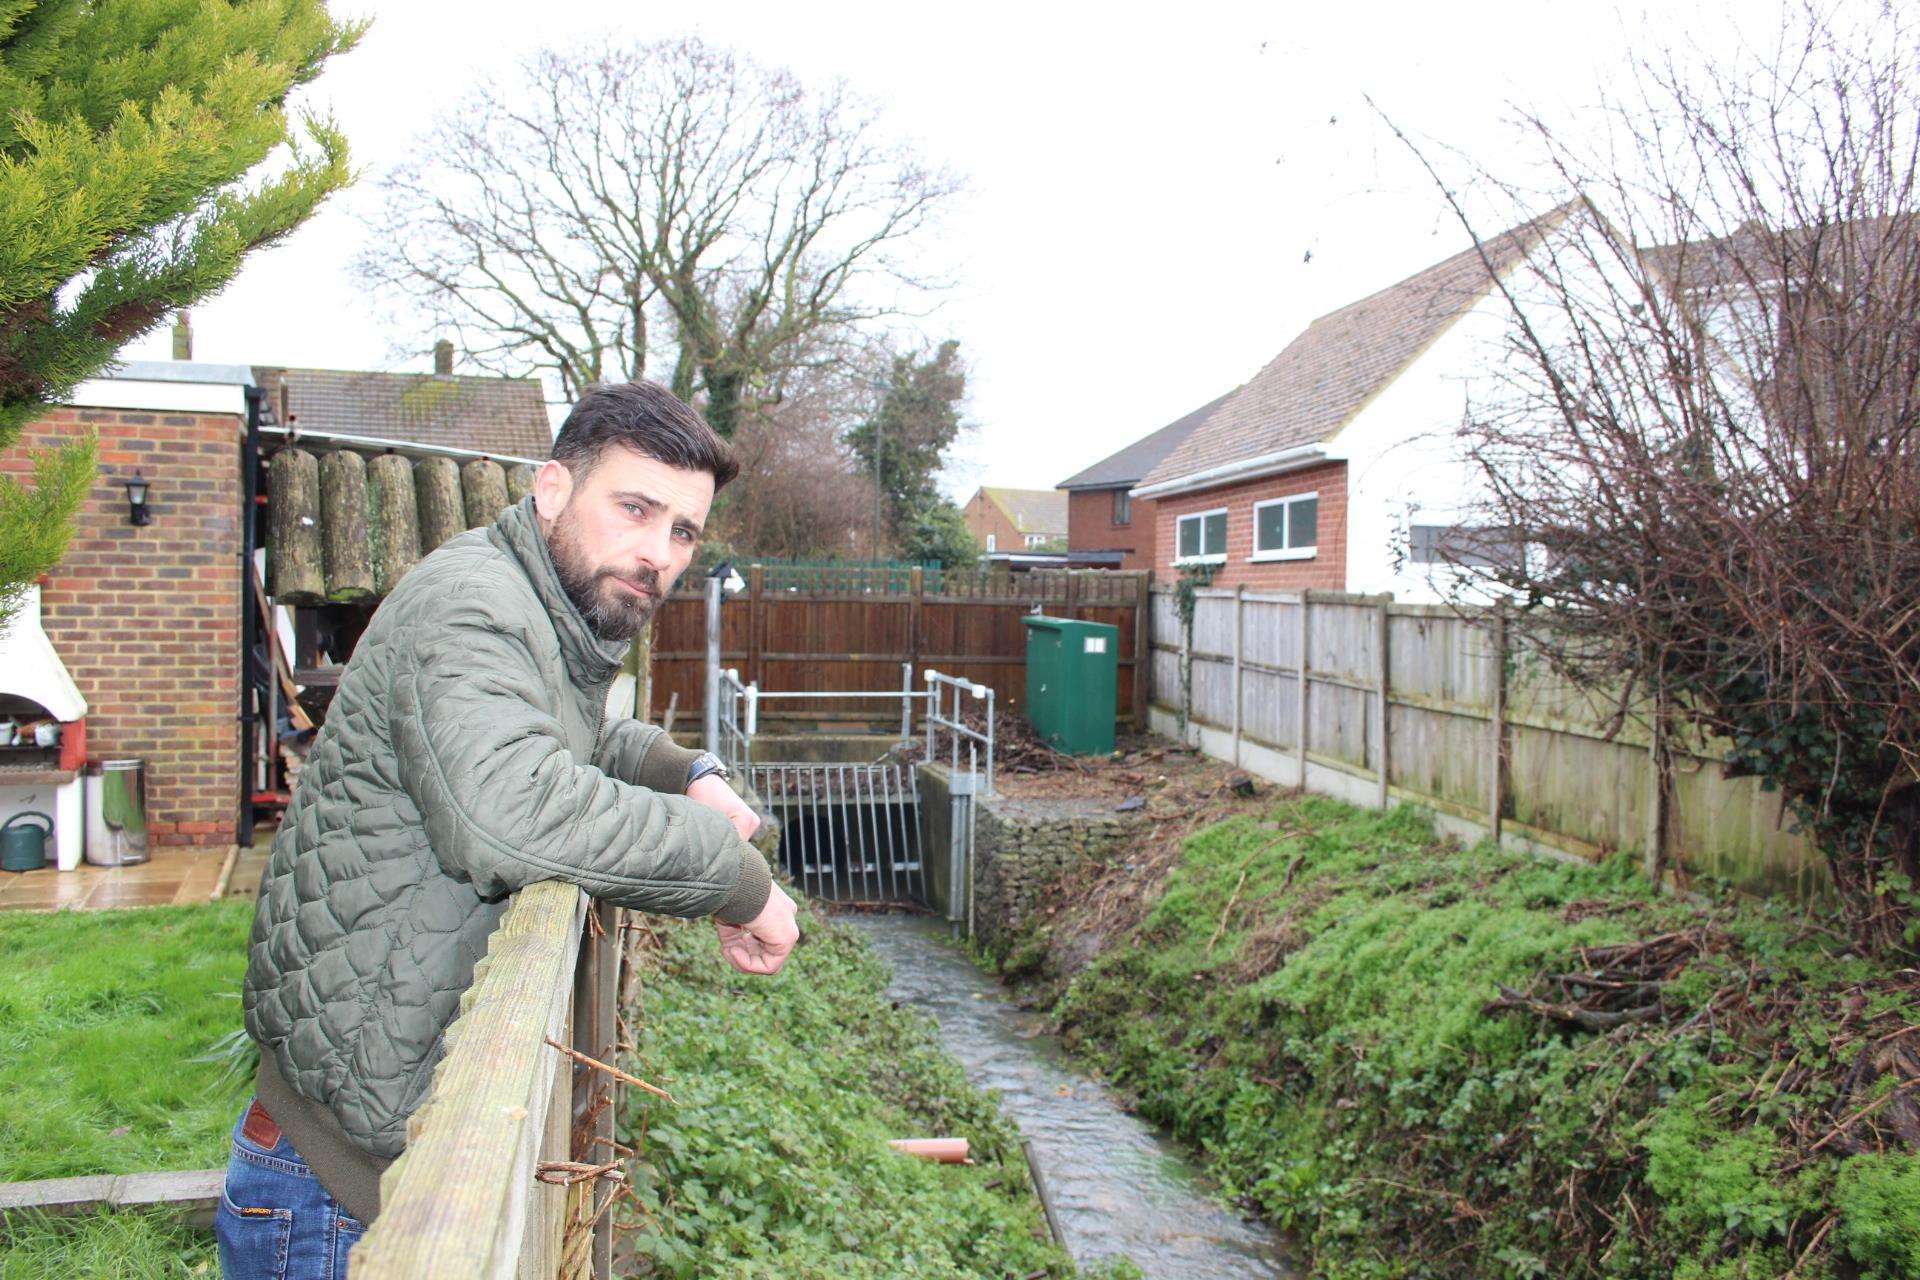 Sean Maxwell overlooks the stream next to his home in Sheerstone, Iwade (6963567)